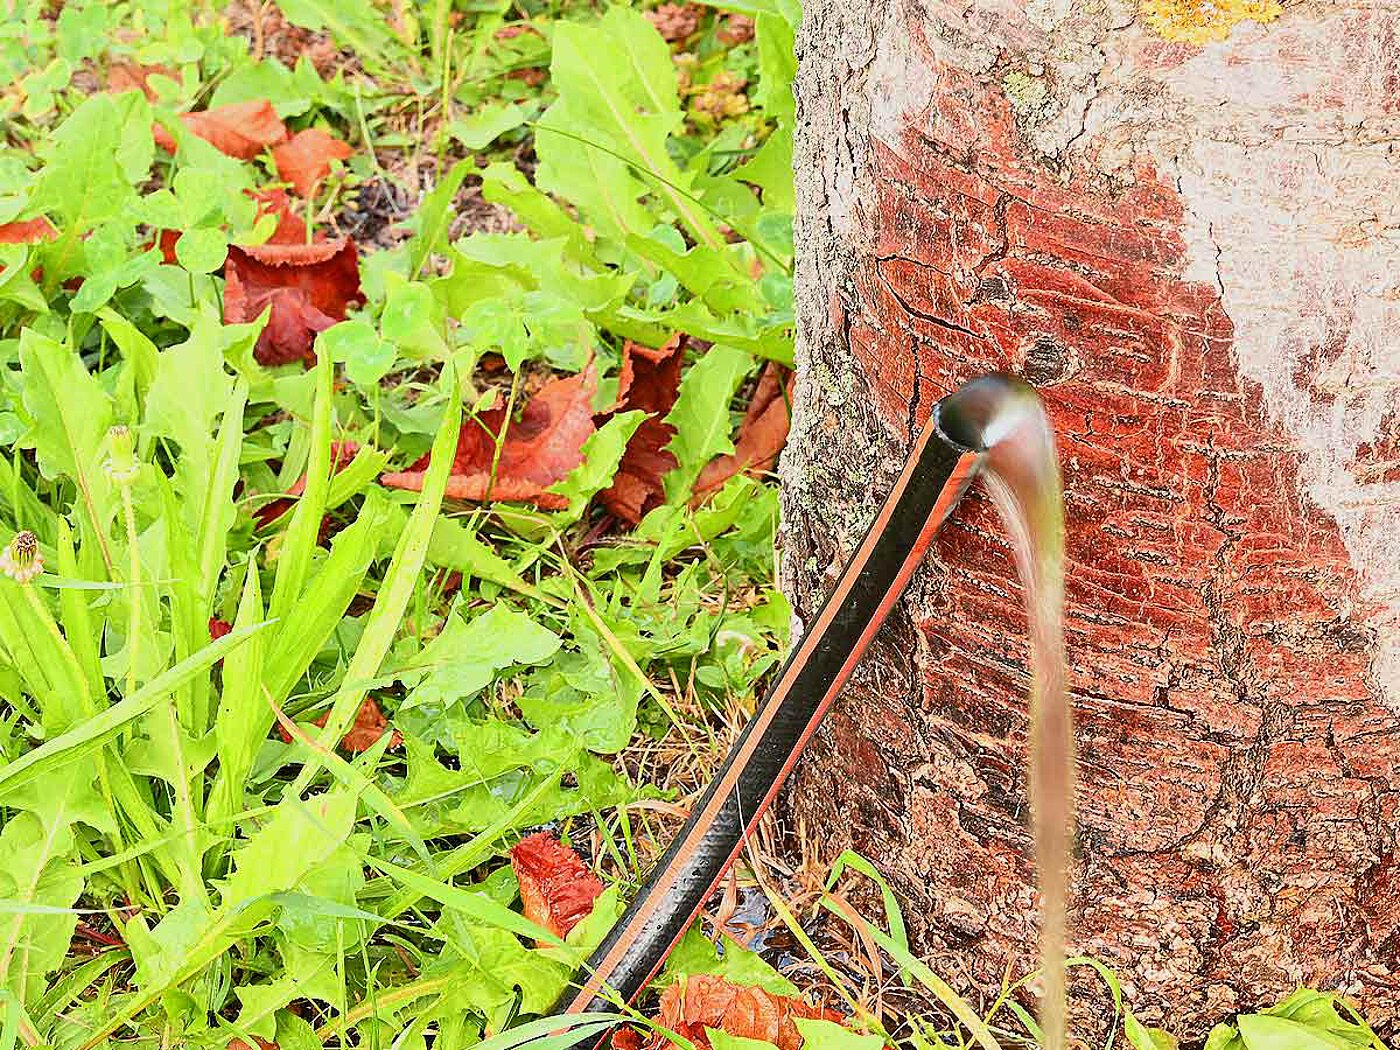 a black-orange striped water hose, which leans toward a gnarled tree-trunk of a chestnut tree, and from which flows a light stream of water, in the background and to the left juicy-green dandelion